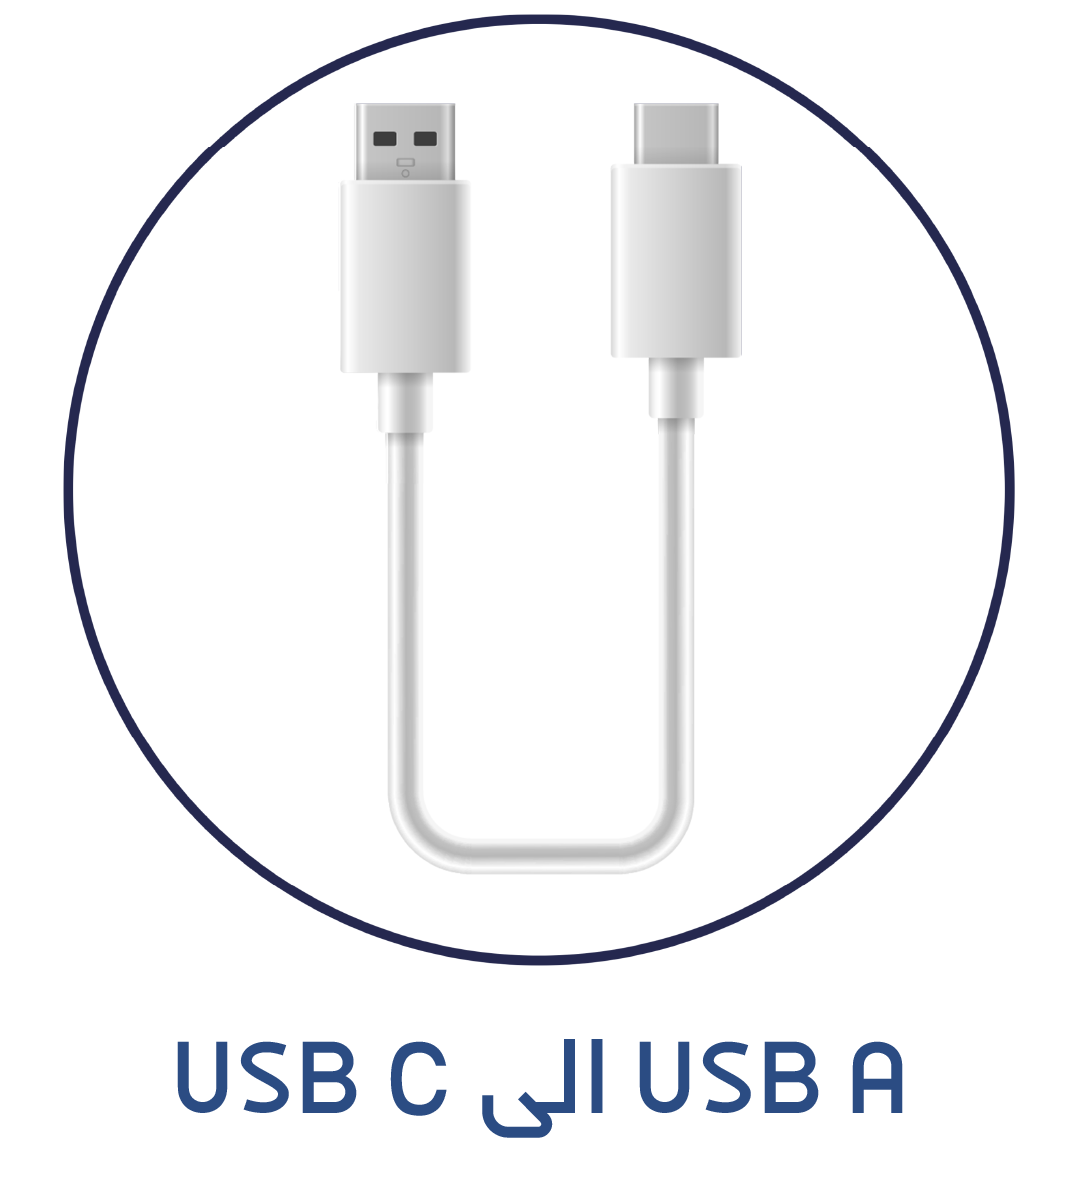 usb c to usb A cables